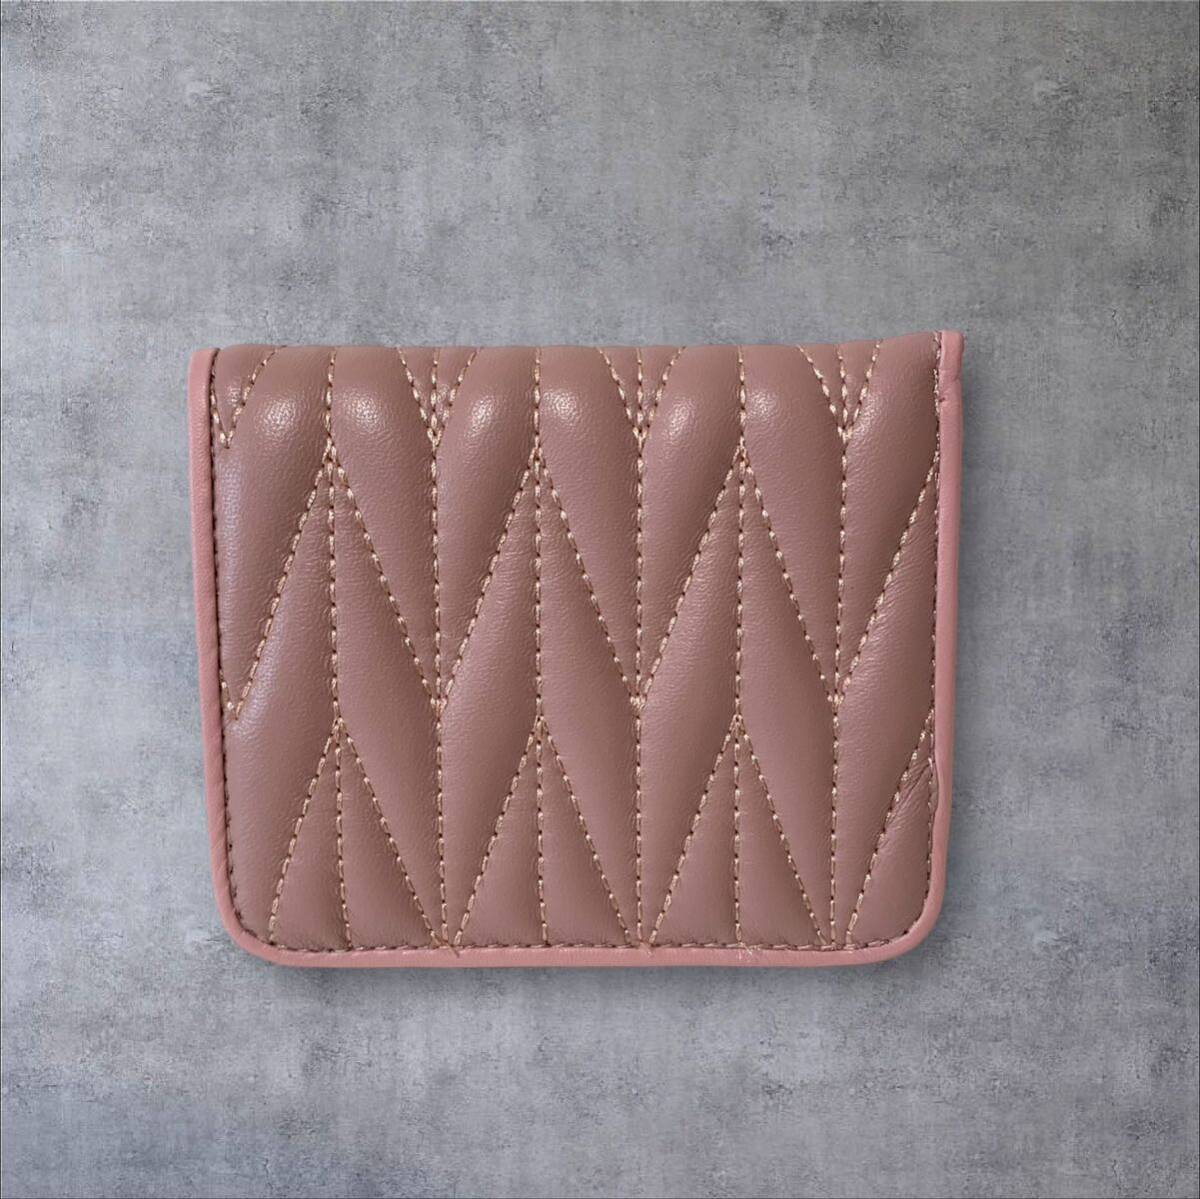  high class ram leather purse # soft sheep leather made compact wallet # pink 